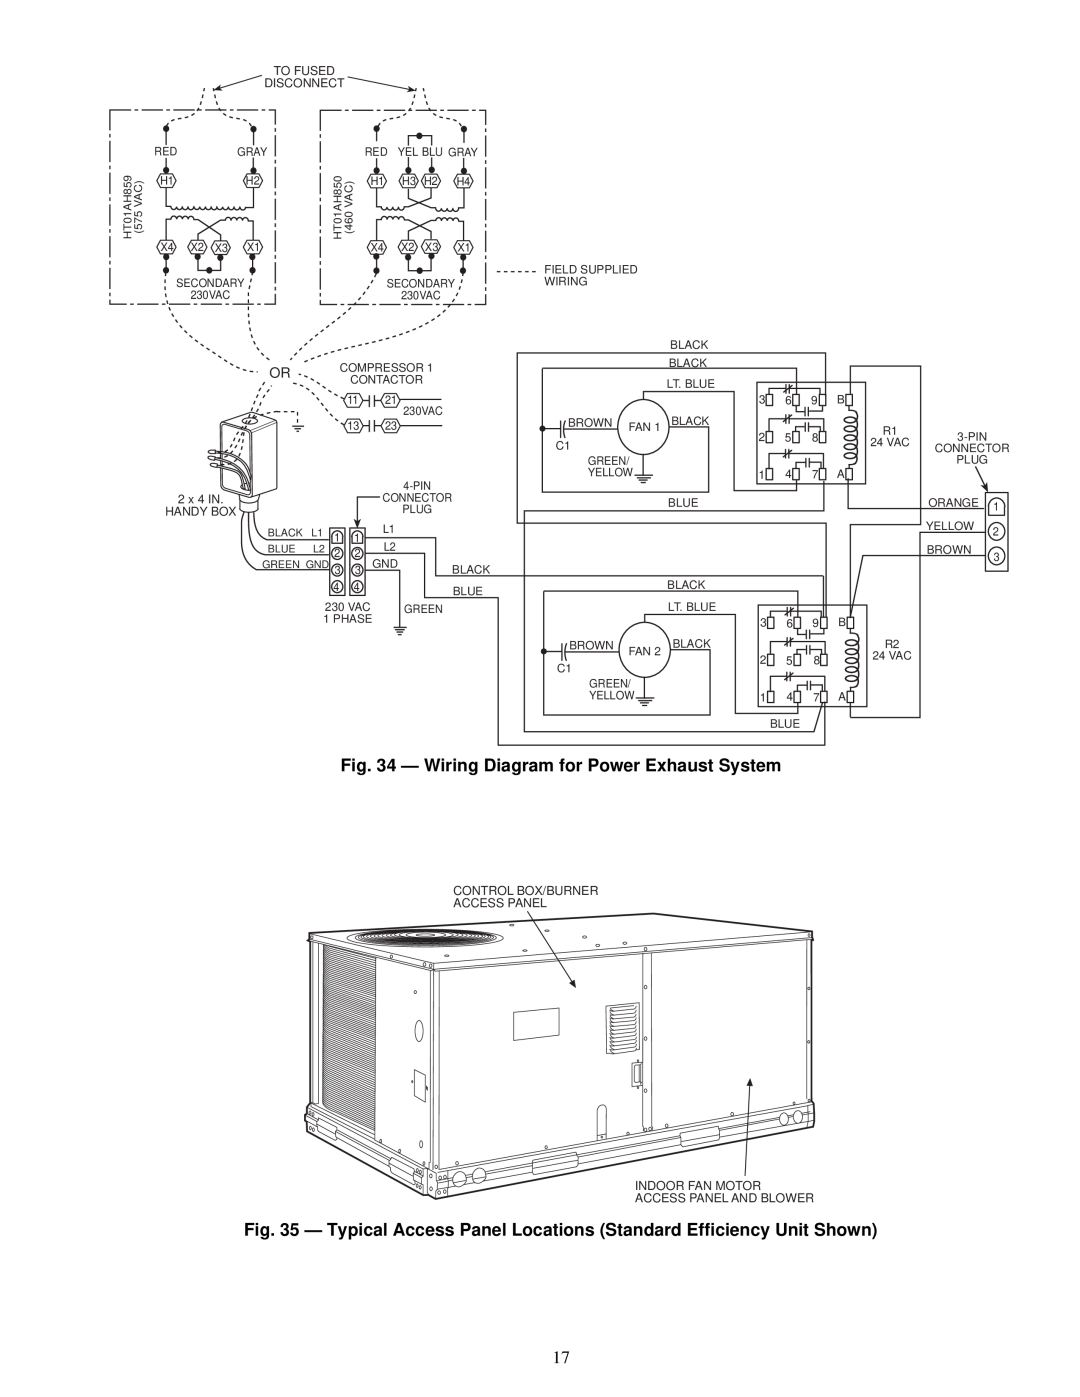 Carrier 48TF004-007 specifications Wiring Diagram for Power Exhaust System 